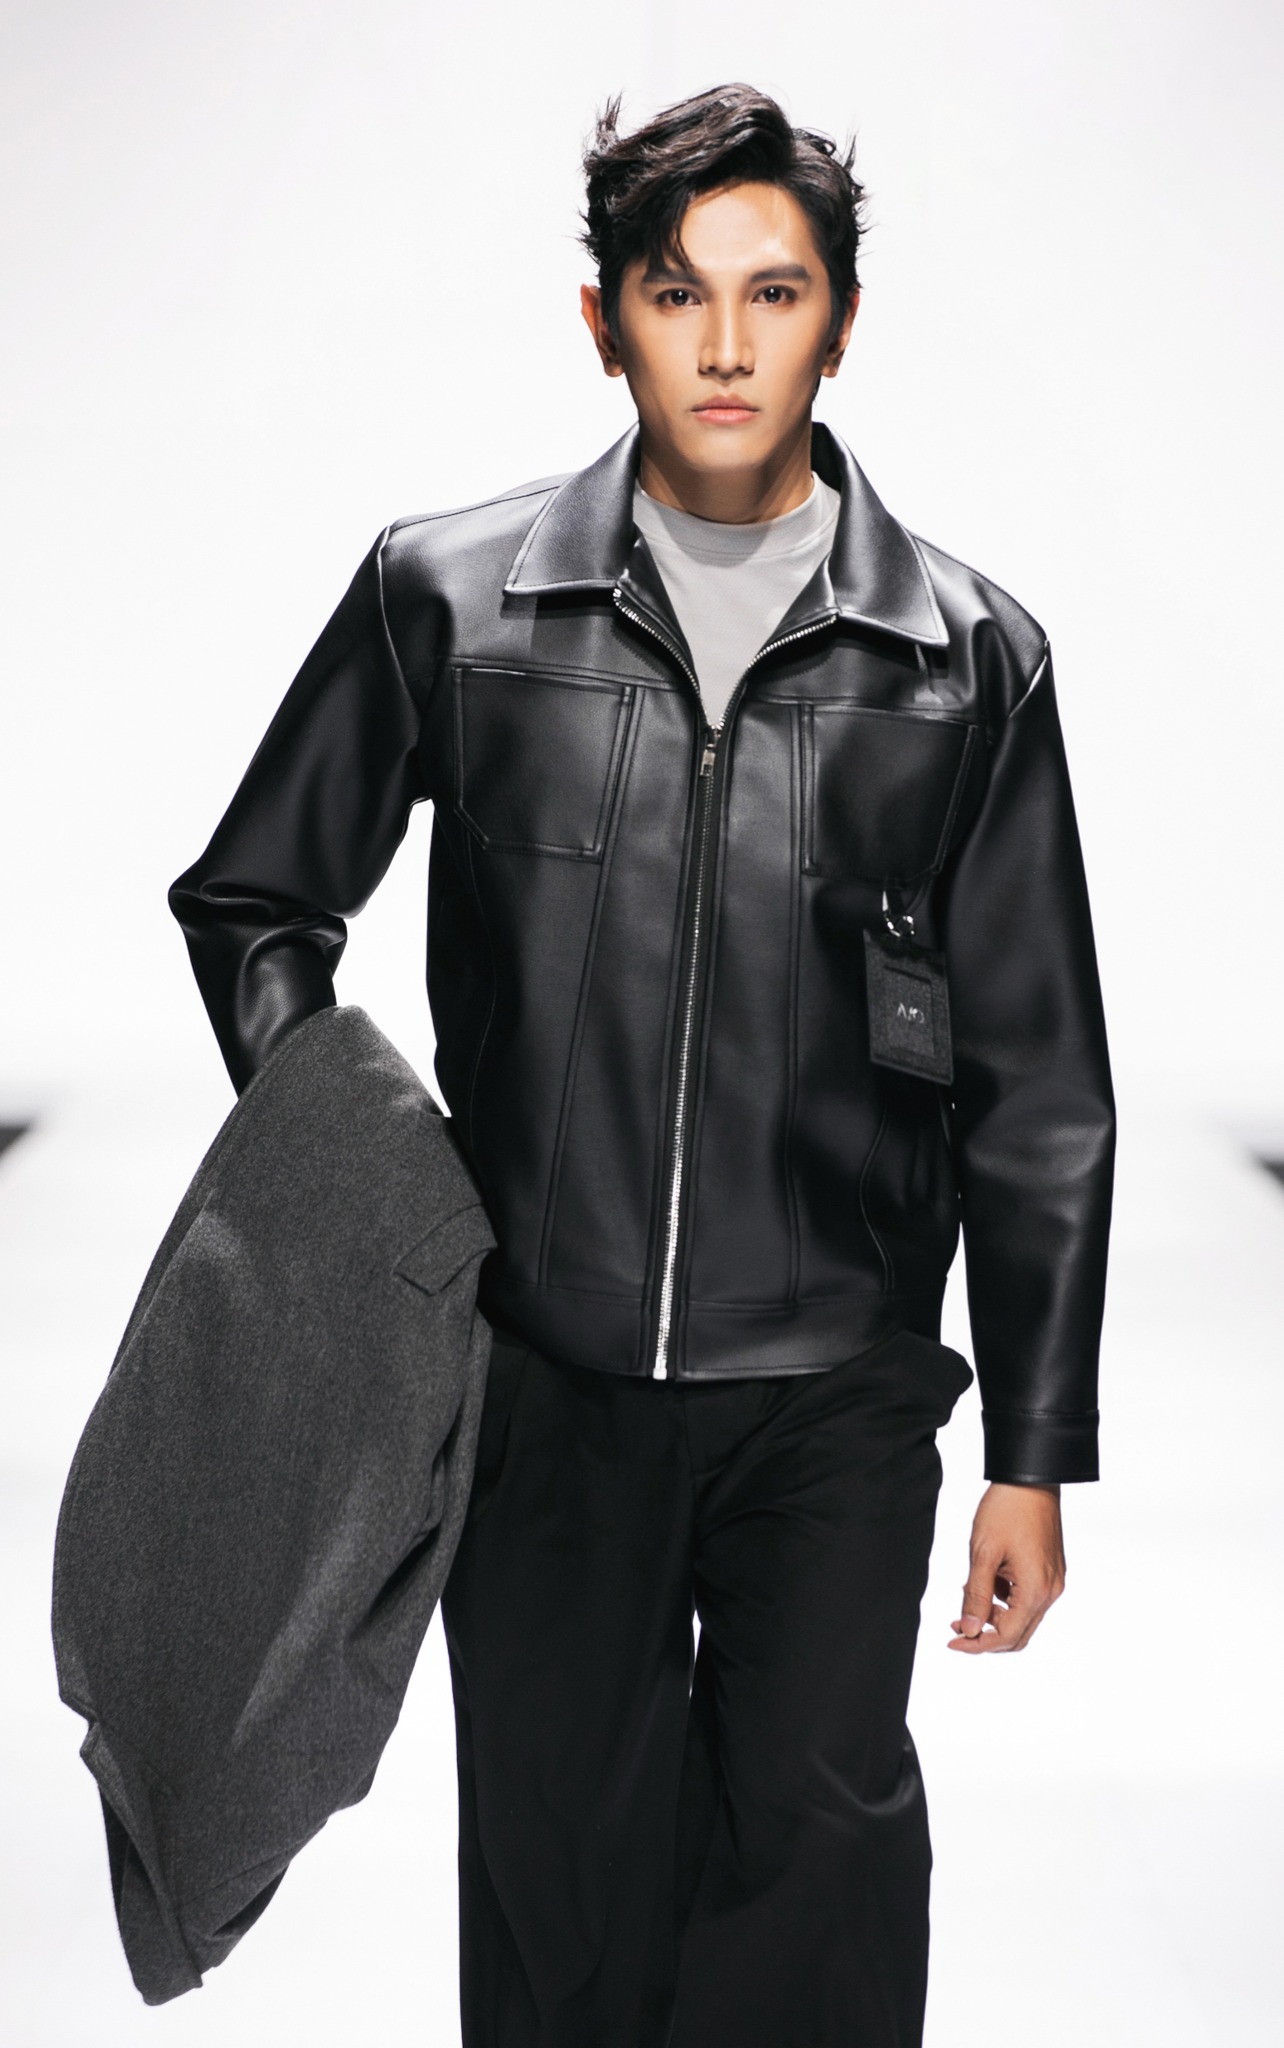 AG09 JACKET LEATHER IN BLACK